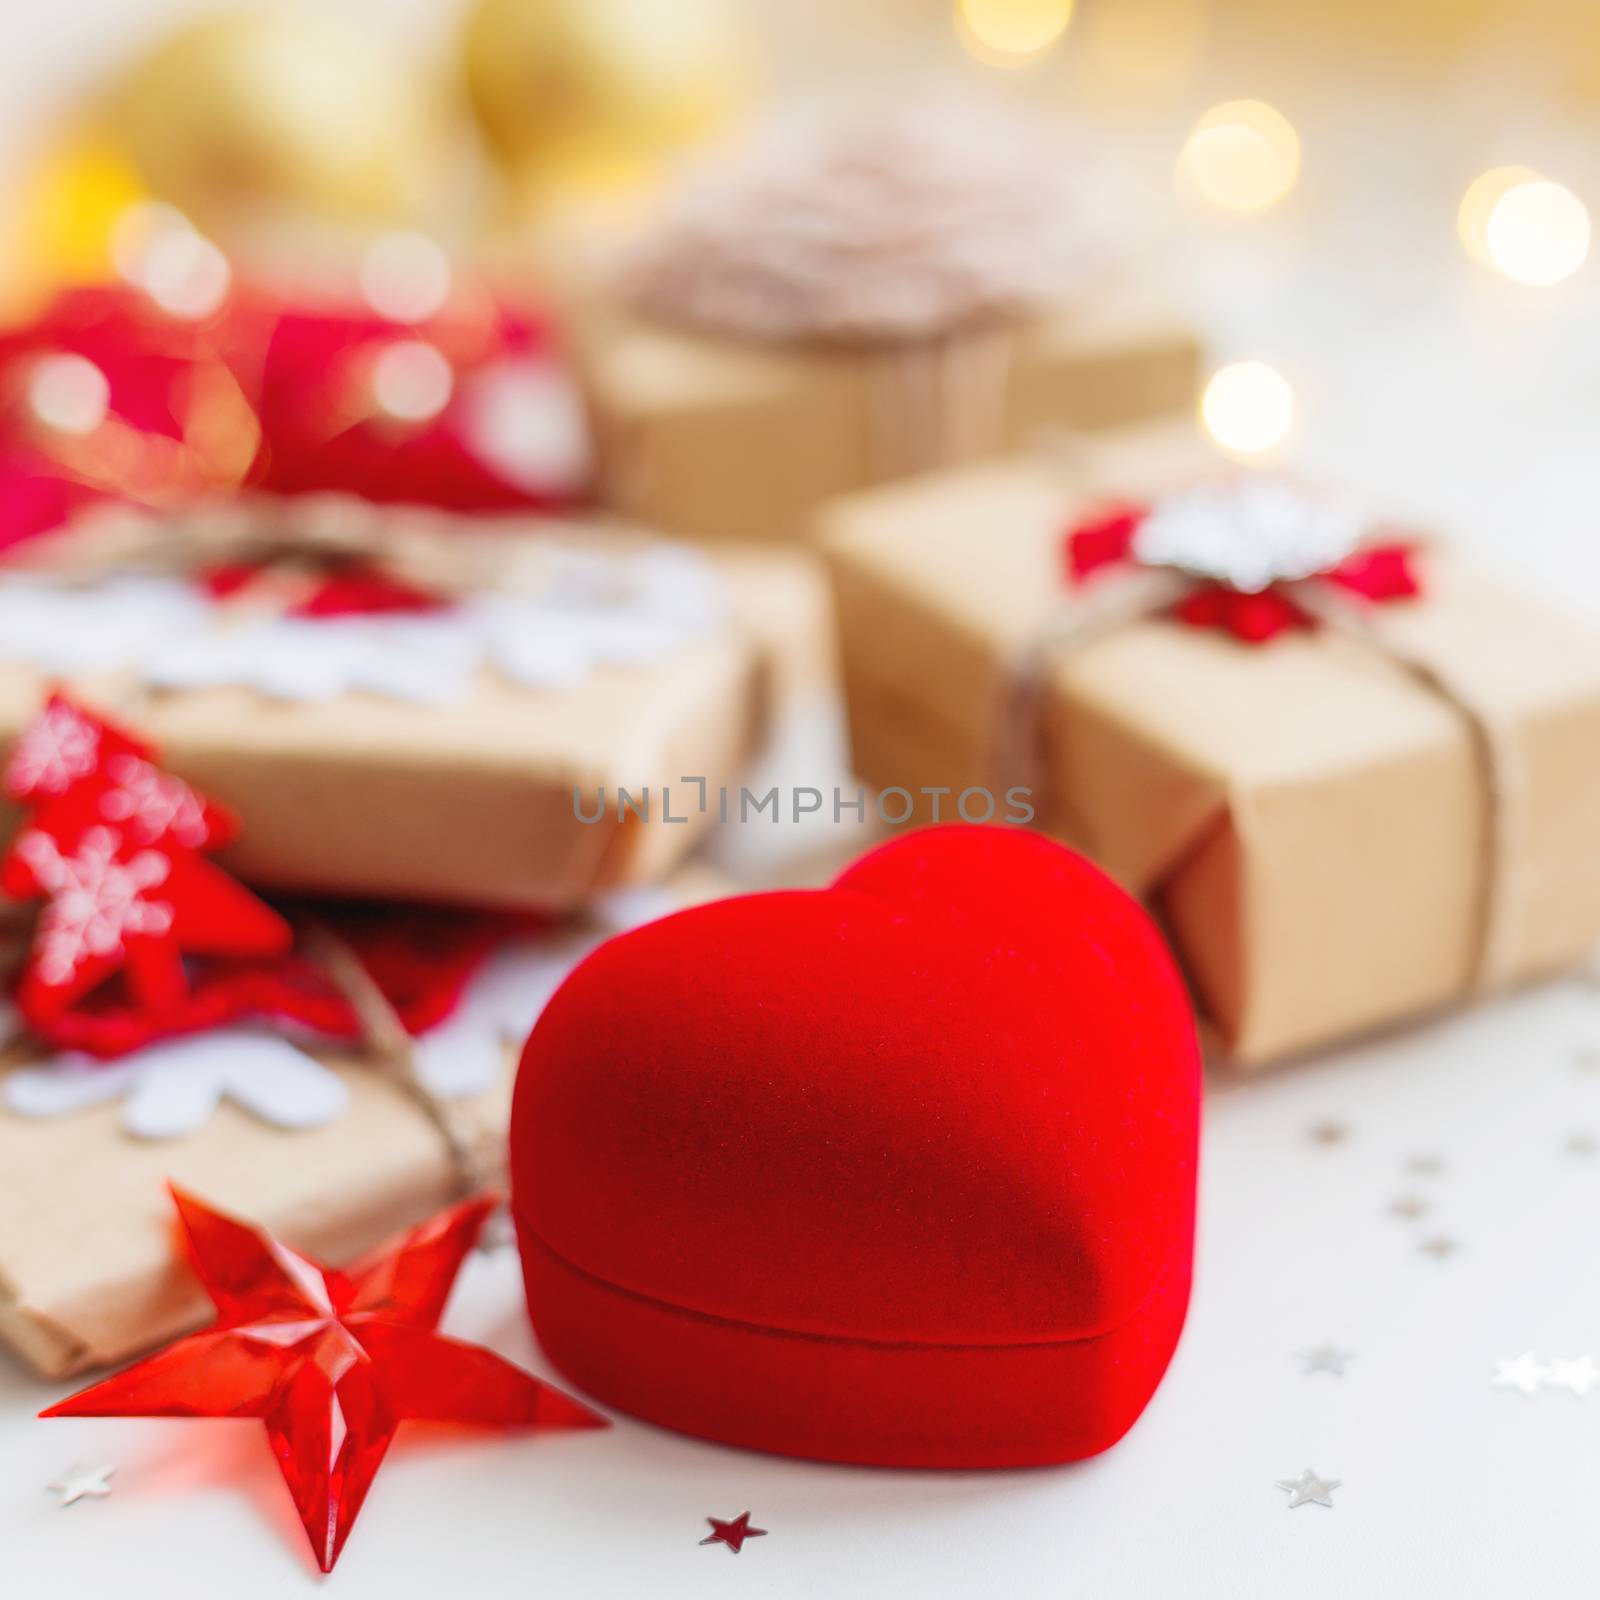 Christmas and New Year background with red box in shape of heart and presents, decorations for Christmas tree. Holiday background with stars confetti and light bulbs. Place for text.